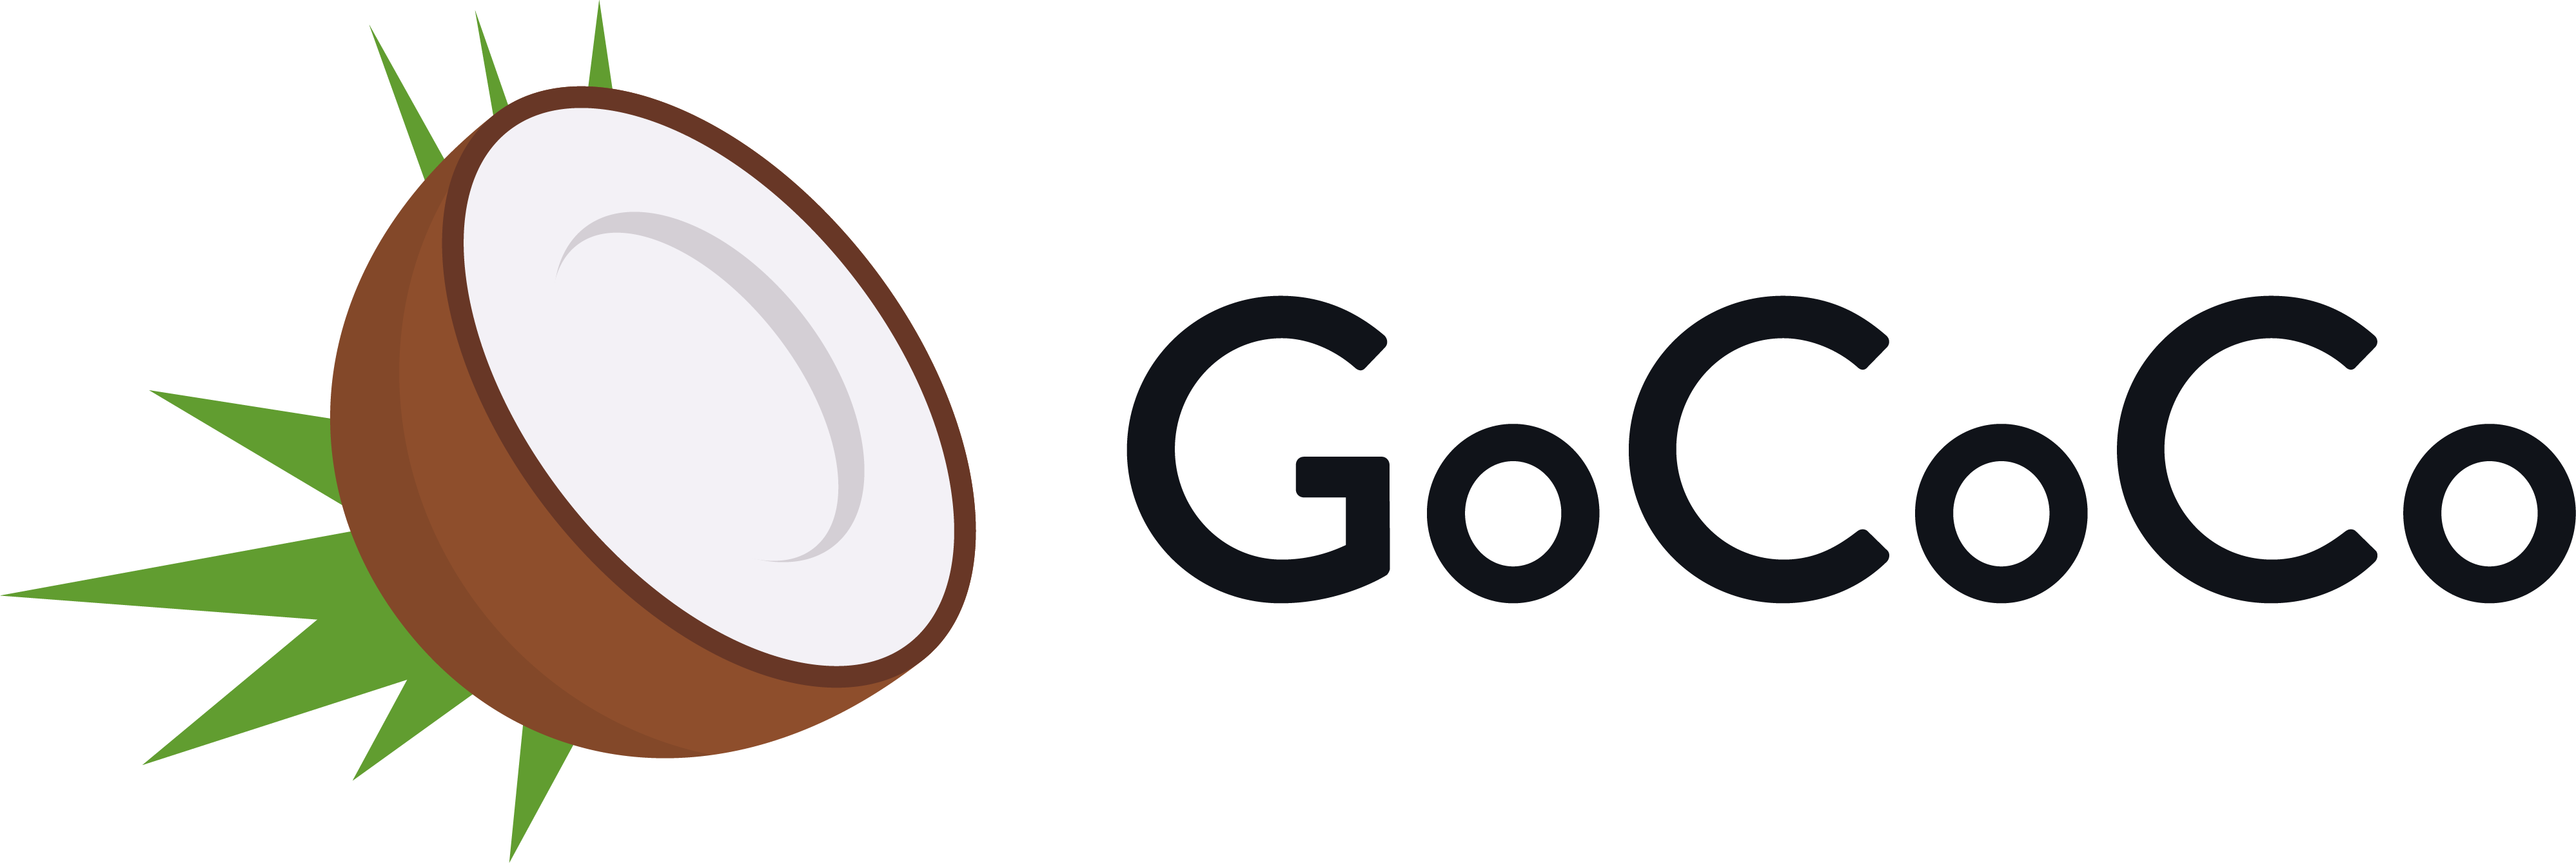 GoCoCo, a powerful new iOS app changing the way we think about nutrition and healthy eating